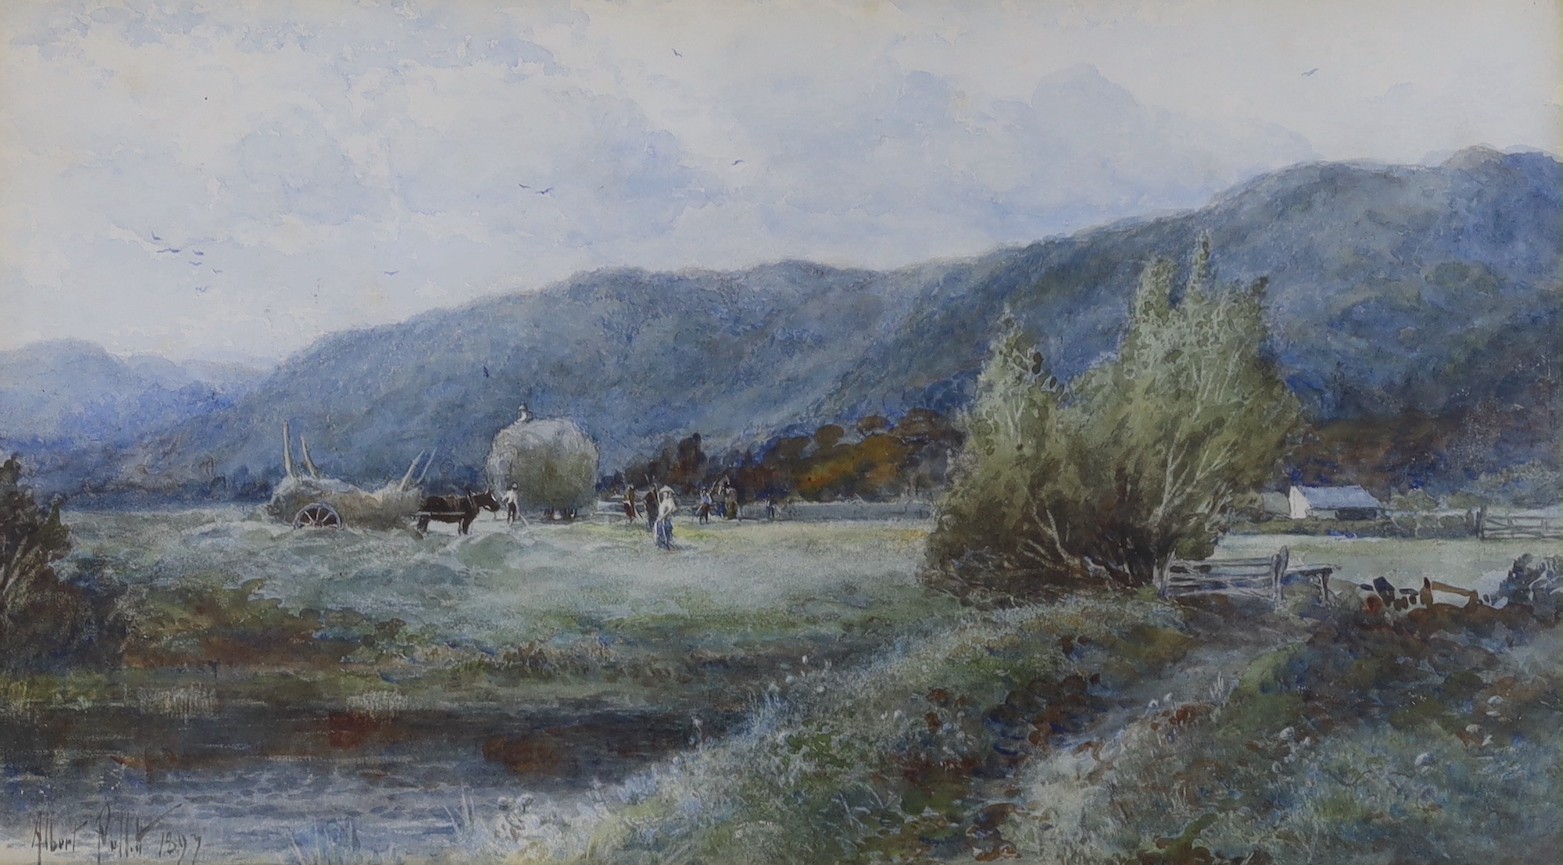 Albert Pollitt (1856-1926), watercolour, Harvesters viewed from across a river, signed and dated 1897, 24 x 44cm